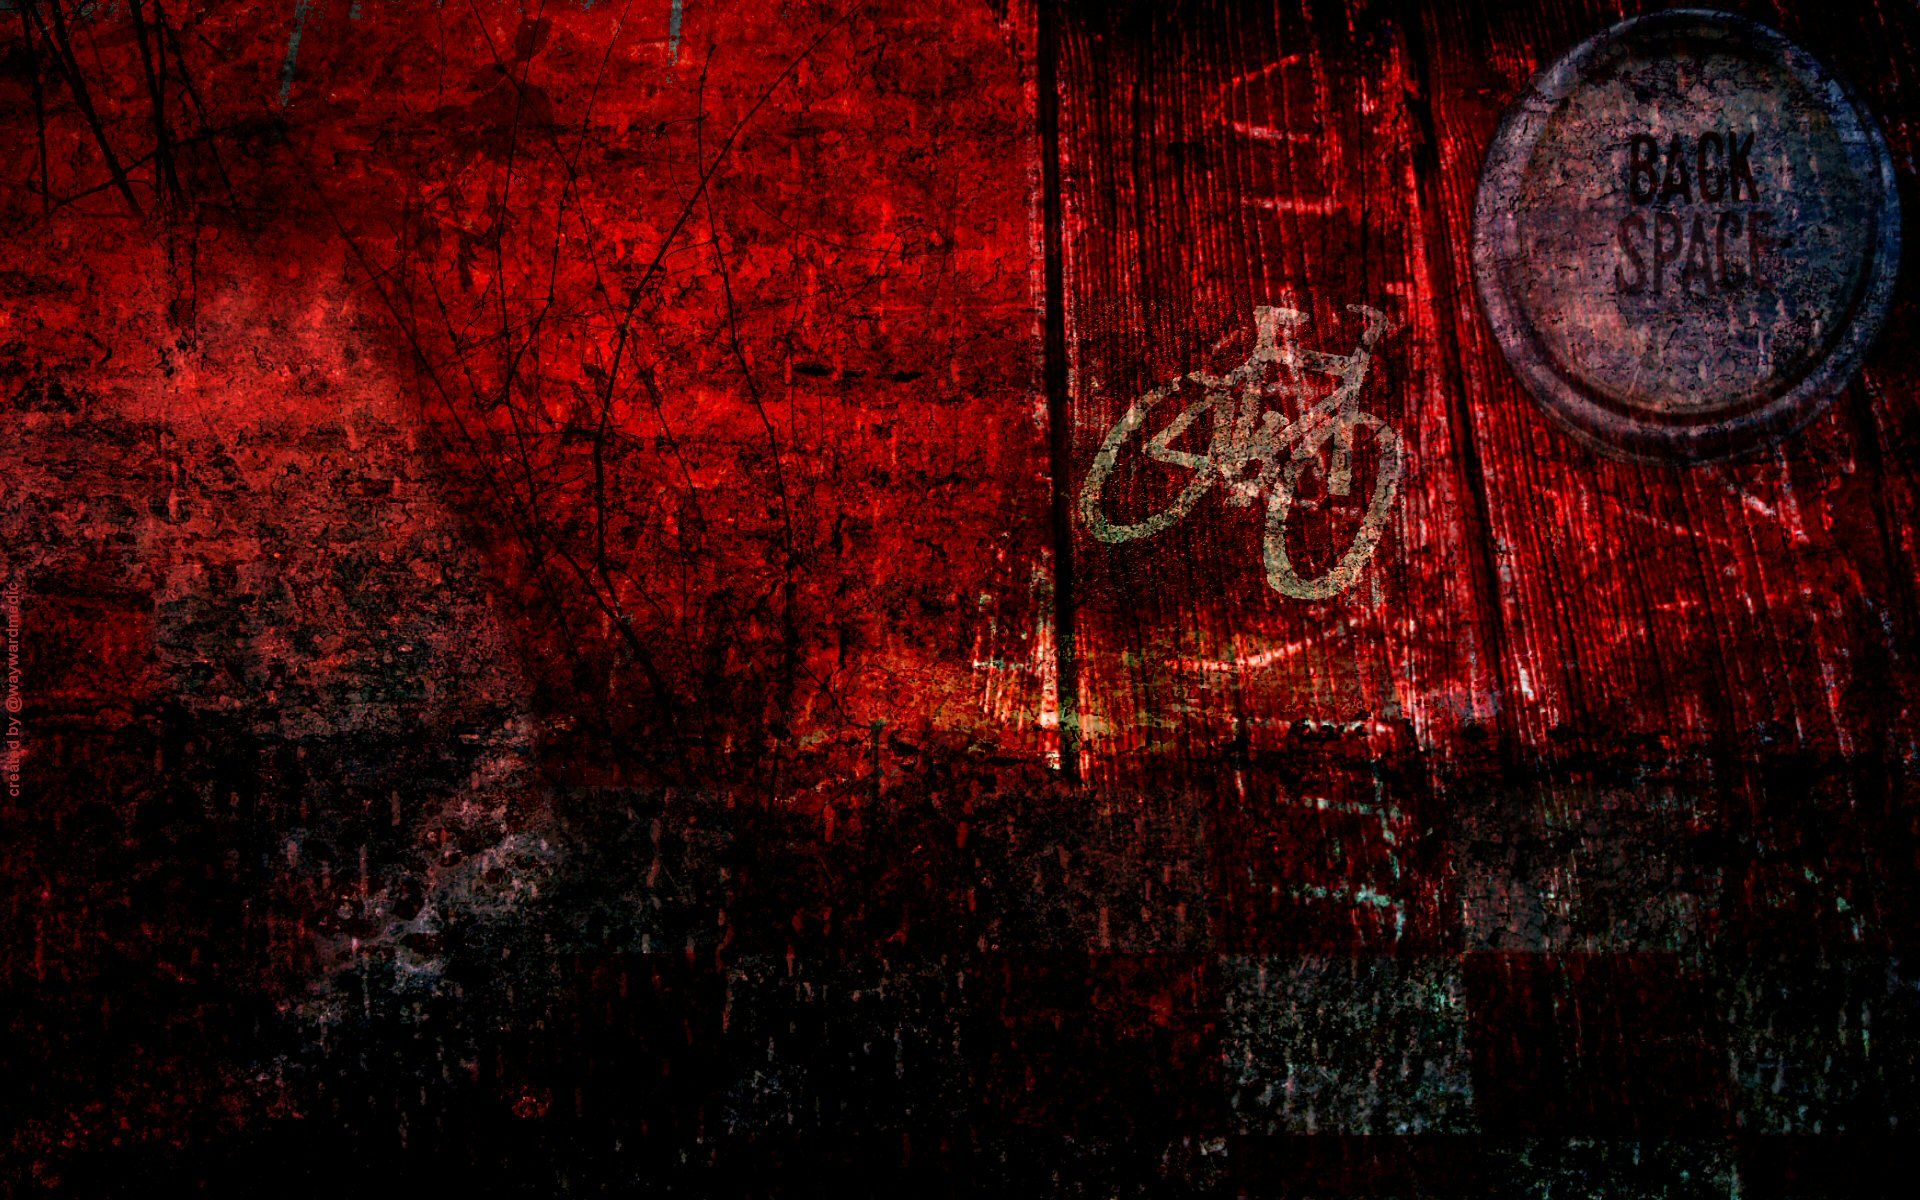 1920x1200 Red grunge twitter background by waywardmedic on deviantART | Hd cool wallpapers, Twitter backgrounds, Red abstract art